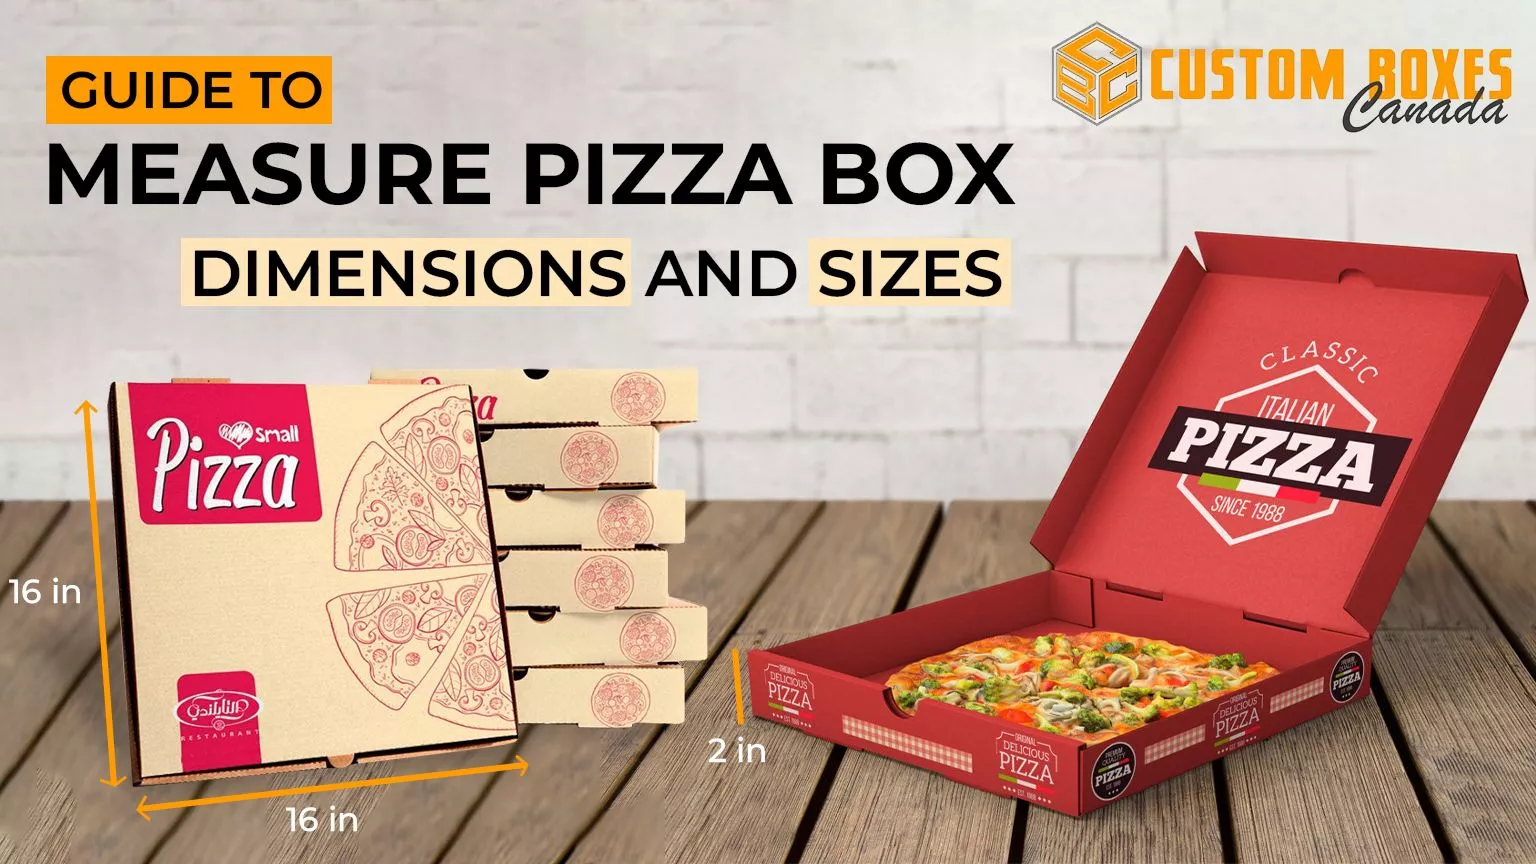 Guide-to-Measure-Pizza-Box-dimensions-and-Sizes